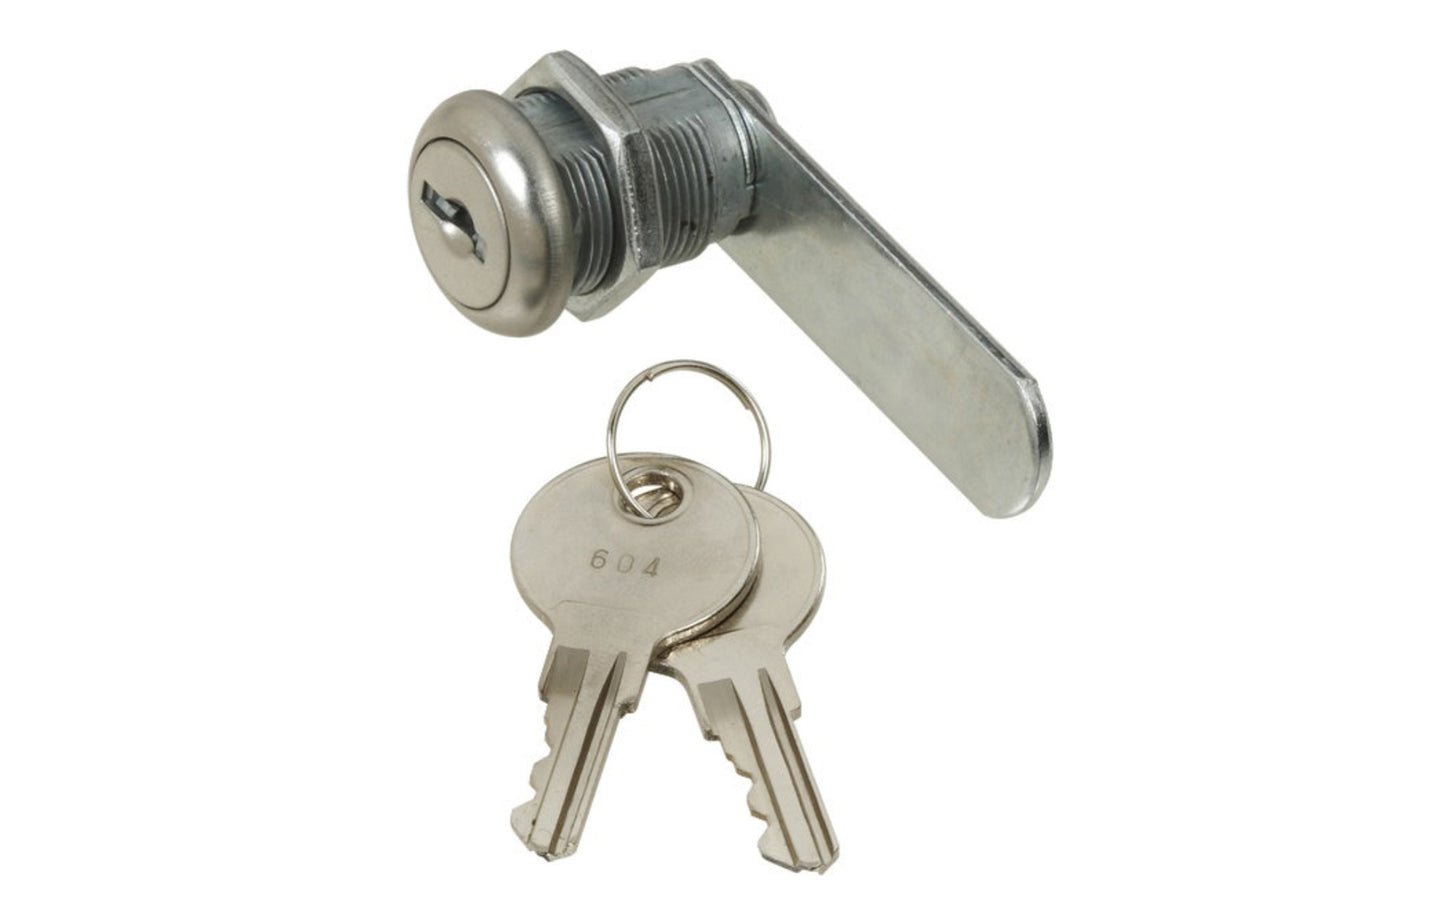 For 1/2" thick material. Utility Door/ Drawer Lock - Keyed Alike. Designed for locking wood or metal cabinet doors and drawers. Yale Y13 or Cole B1 key blank. Die-cast Zinc body. Bar, face plate and parts made of steel. National Hardware Model N185-280.